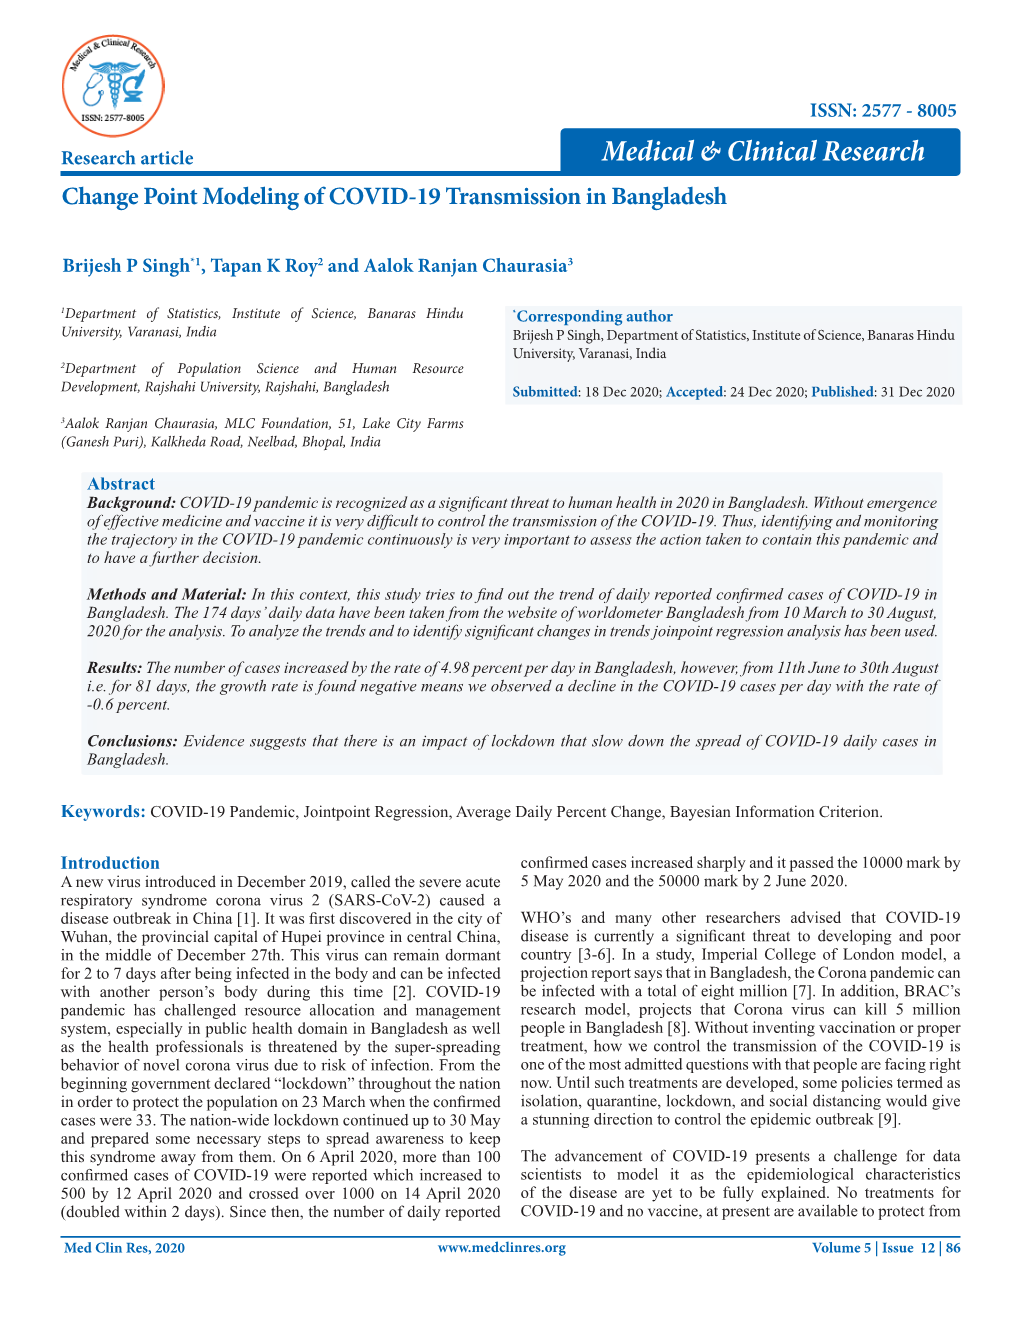 Change Point Modeling of COVID-19 Transmission in Bangladesh